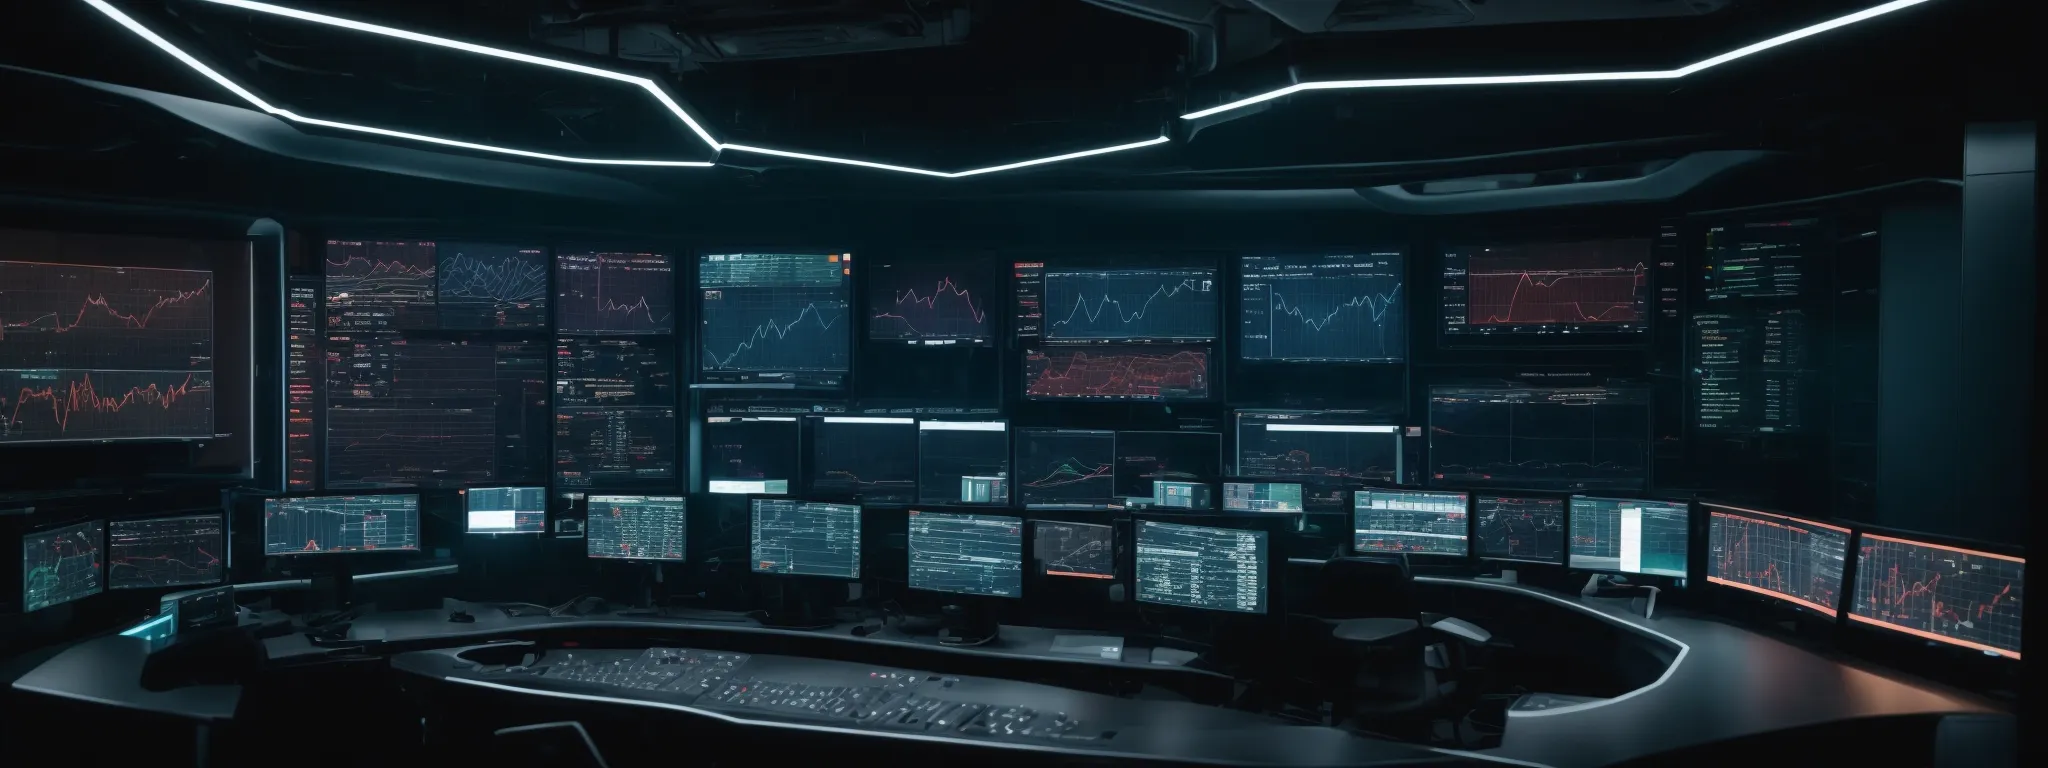 a futuristic control room with screens displaying data analytics and web graphs.